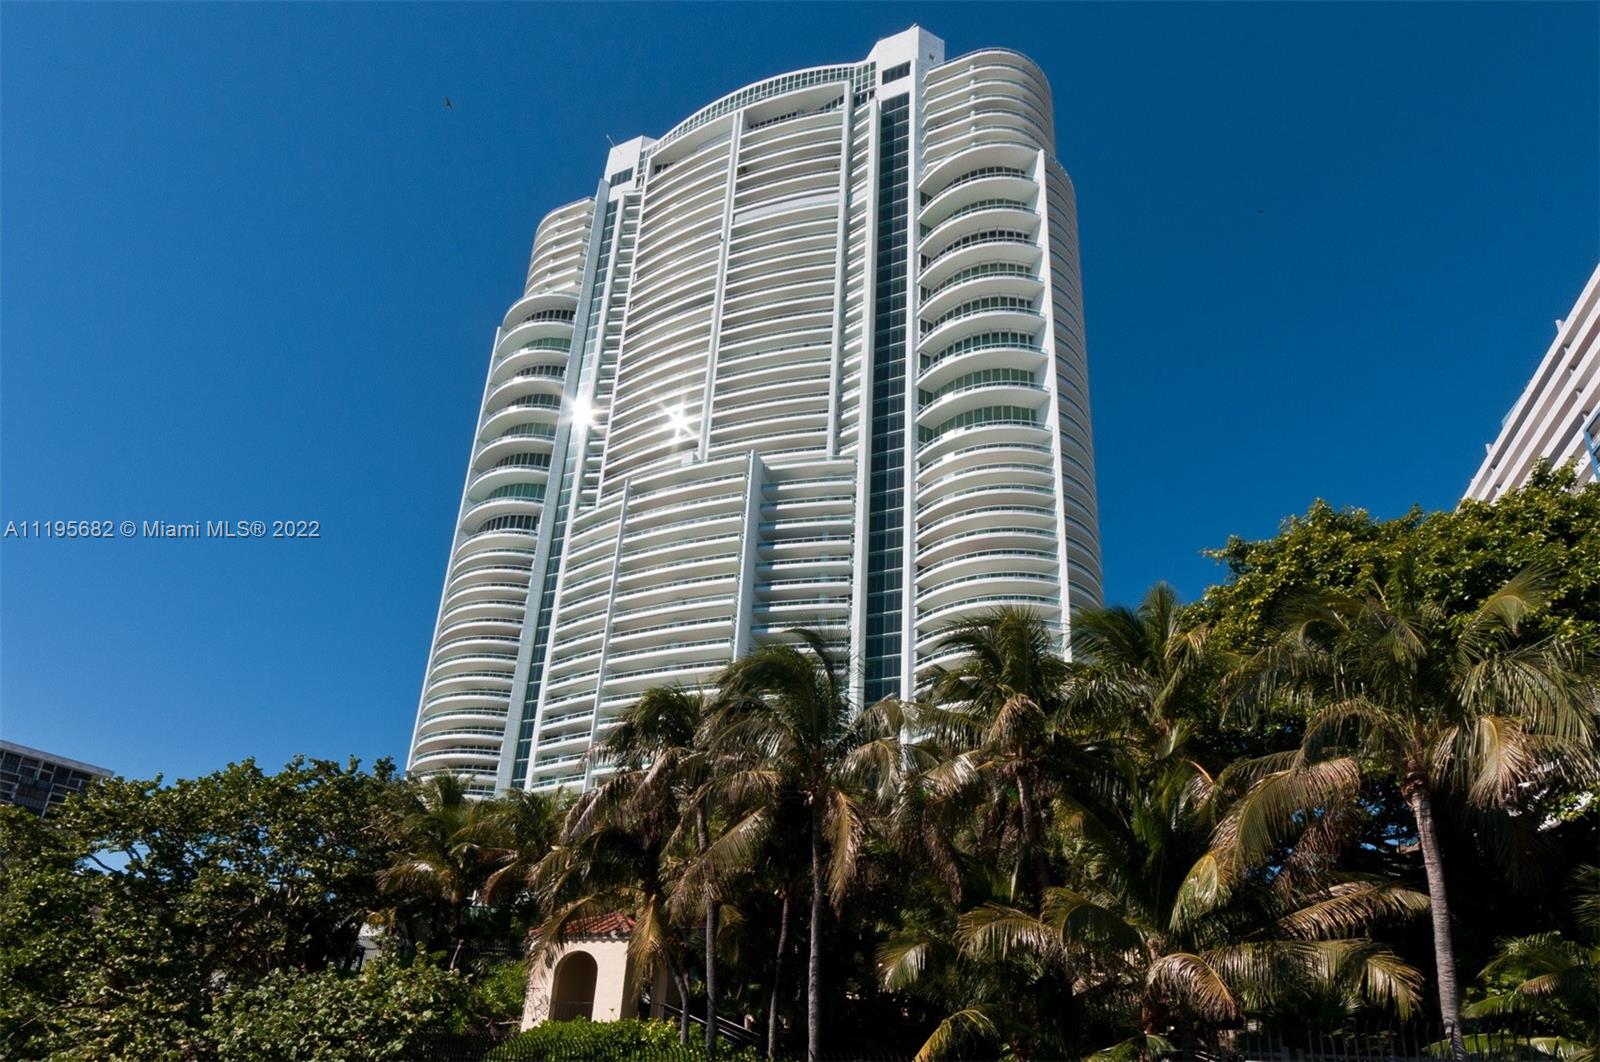 Sensational flow-through residence on the 33rd floor at the Santa Maria offers direct ocean, bay and city skyline views. Also featuring a fantastic layout, 4,030 sq.ft. of living area, private elevator foyer, 4 bedrooms & 5.5 bathrooms, floor to ceiling windows, distribution hall that separates social areas from private ones, master bedroom with his & her bathrooms and large walk-in closets, Italian Snaidero kitchen with top of the line appliances, maid’s quarters with full bathroom, 2 assigned parking spaces, storage unit, 2 expansive terraces with panoramic views of the Atlantic Ocean, Biscayne Bay and Miami skyline. Santa Maria’s distinctive lifestyle with outstanding amenities makes living here the best choice in South Florida.